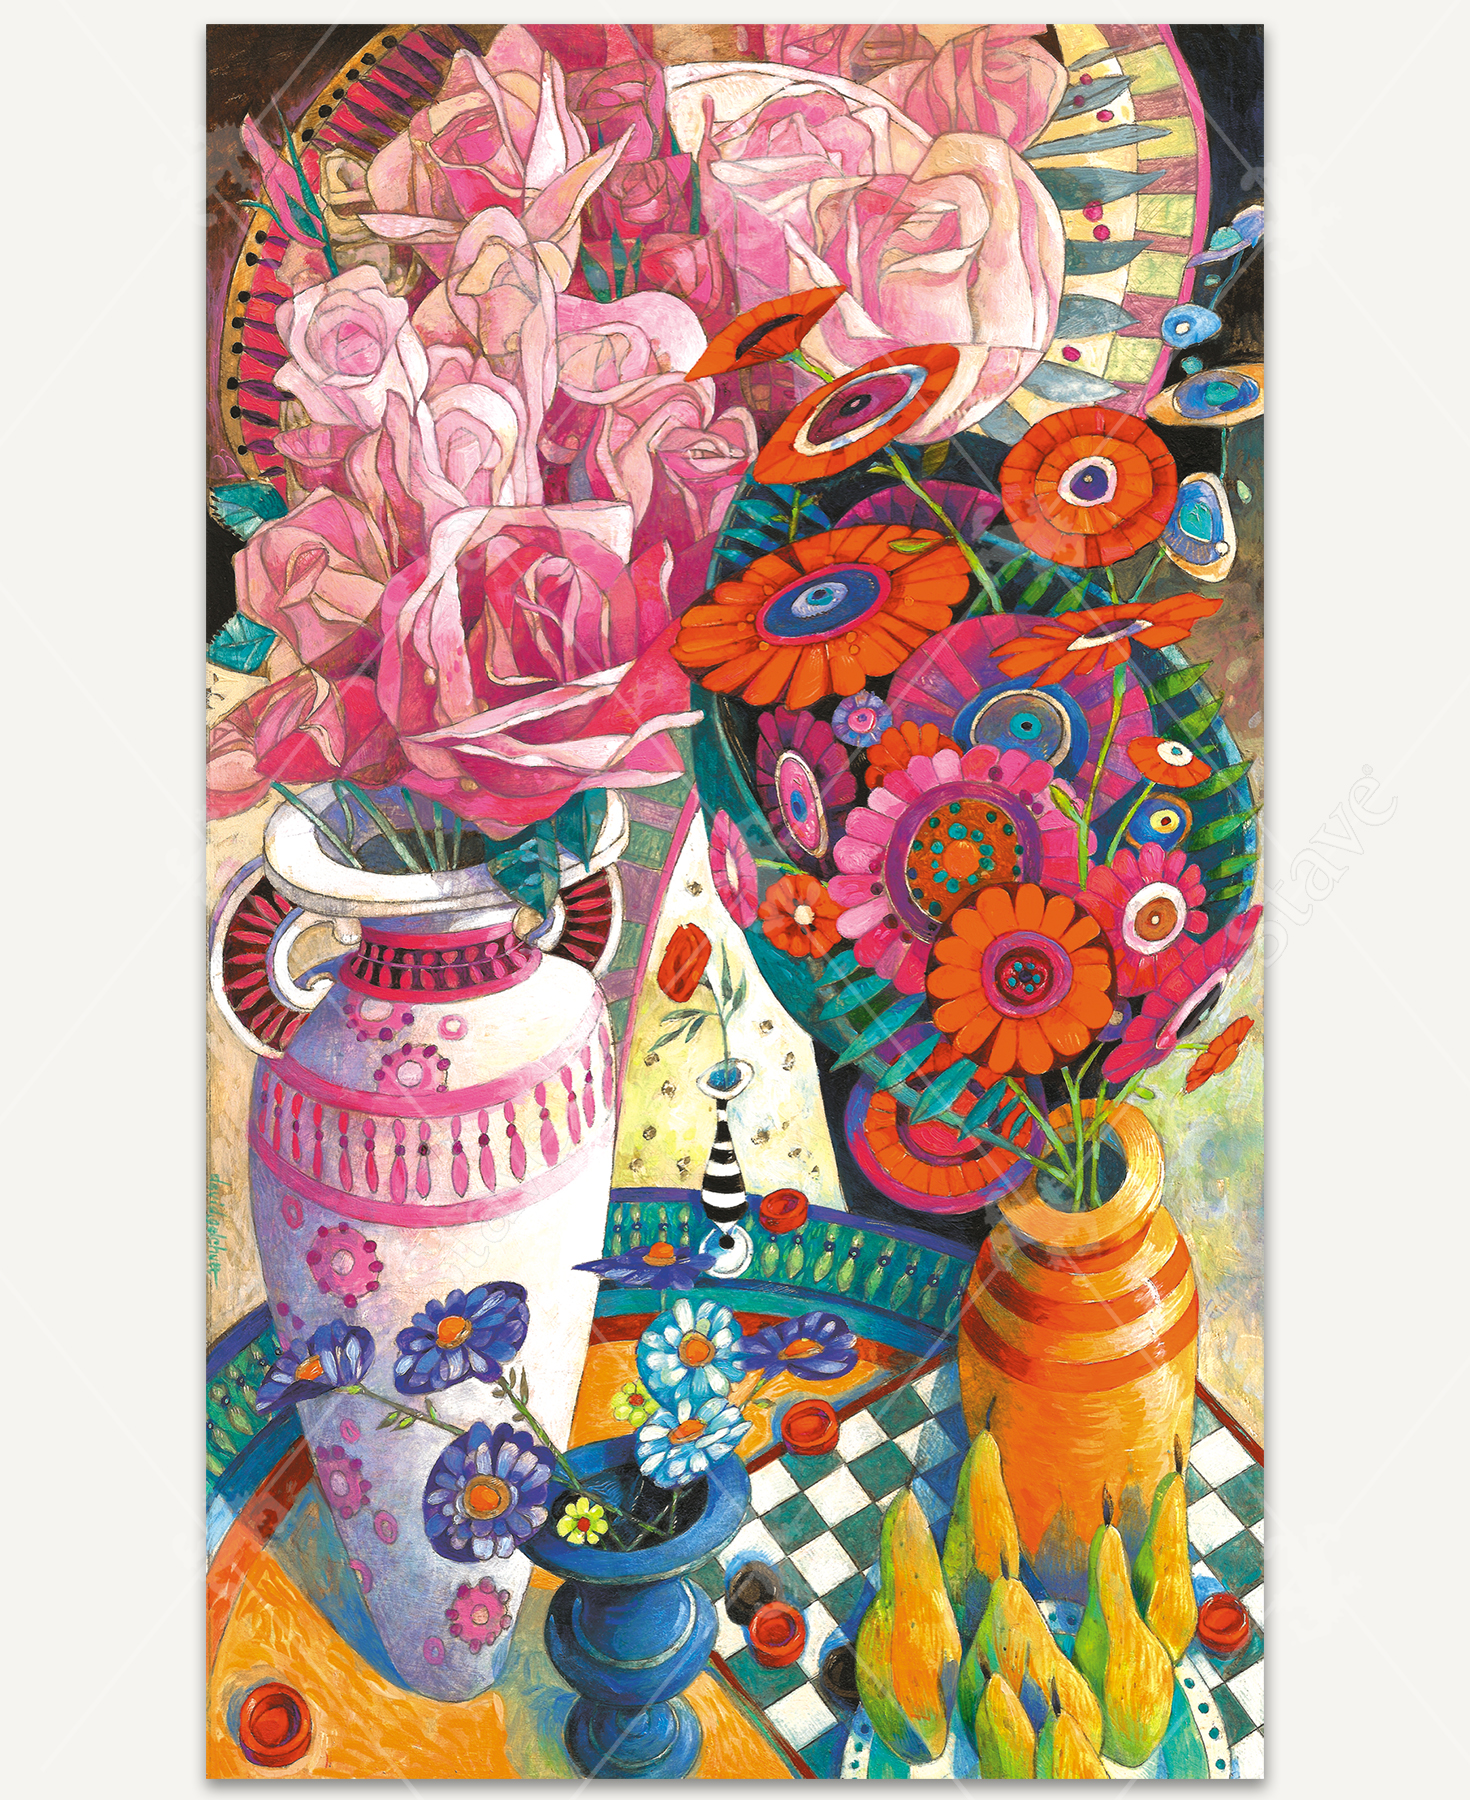 Crowning Glory wooden jigsaw puzzle presents a still life of botanicals in four different size vases, arranged based on color of pink, orange, blue and red, sitting on a table with a plate of pears on top of a checkerboard. Checker pieces are scattered around the table.